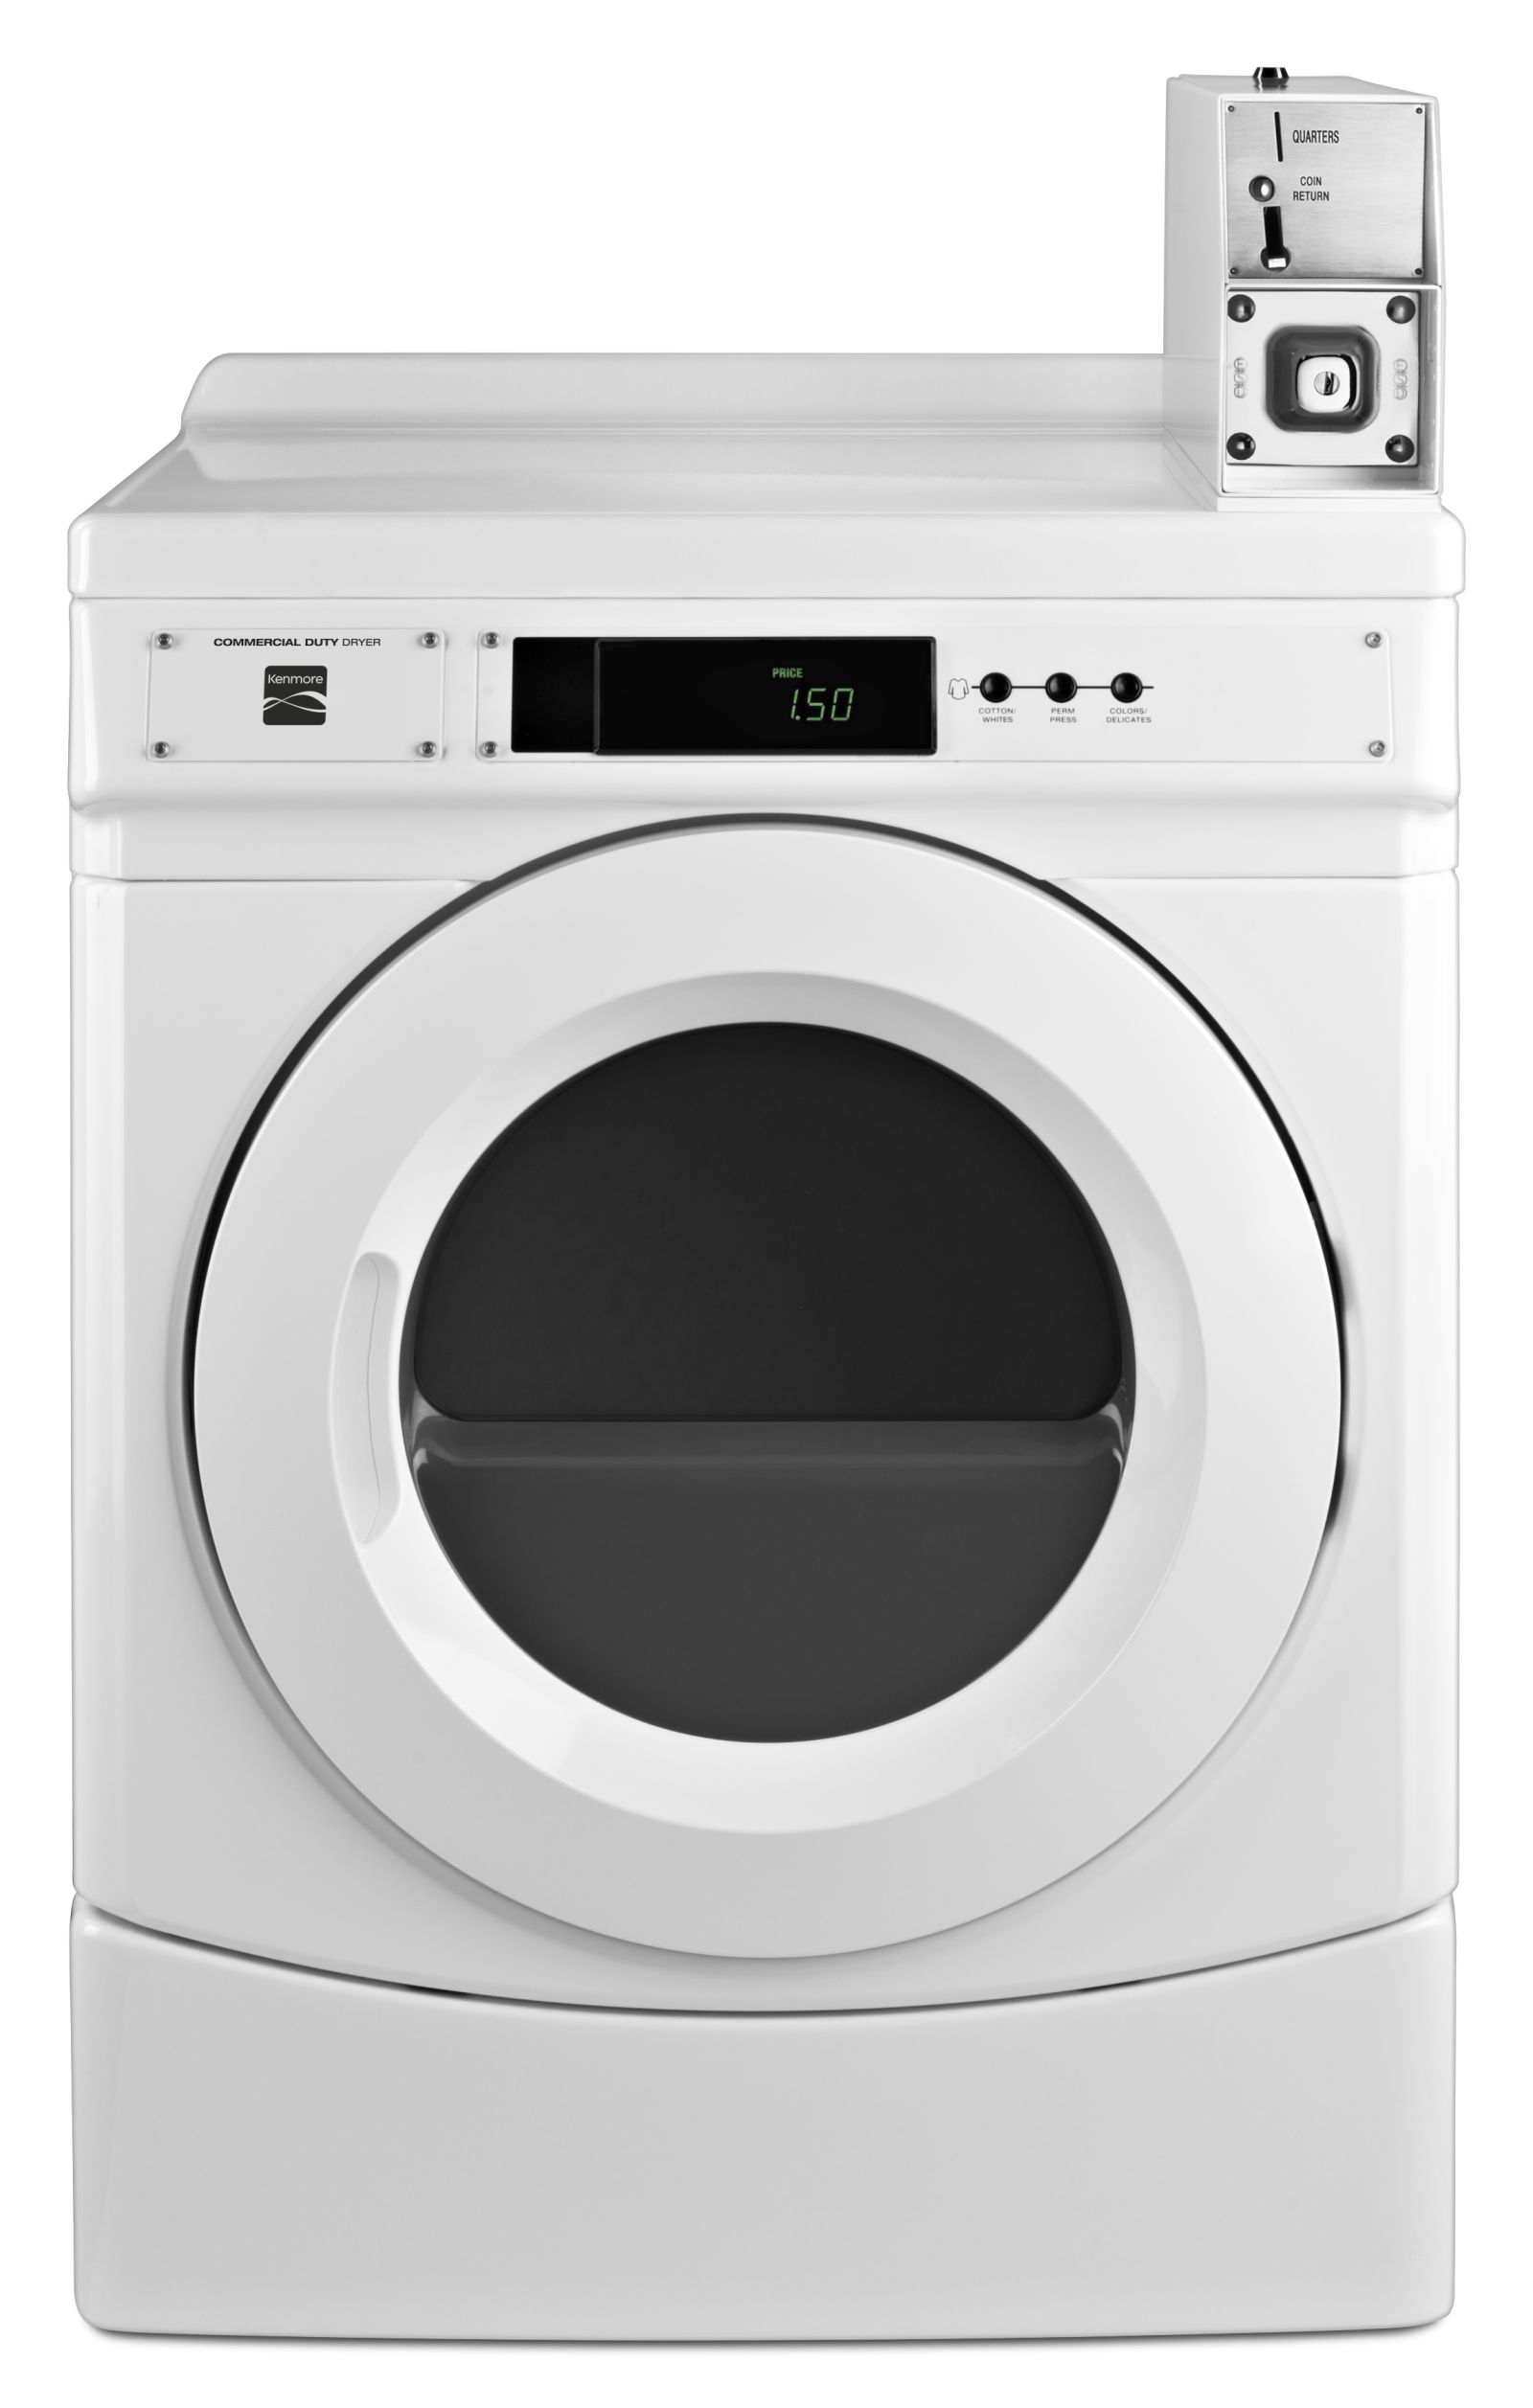 Kenmore 81952 6.7 cu. ft. Coin-Operated Commercial Electric Dryer - White